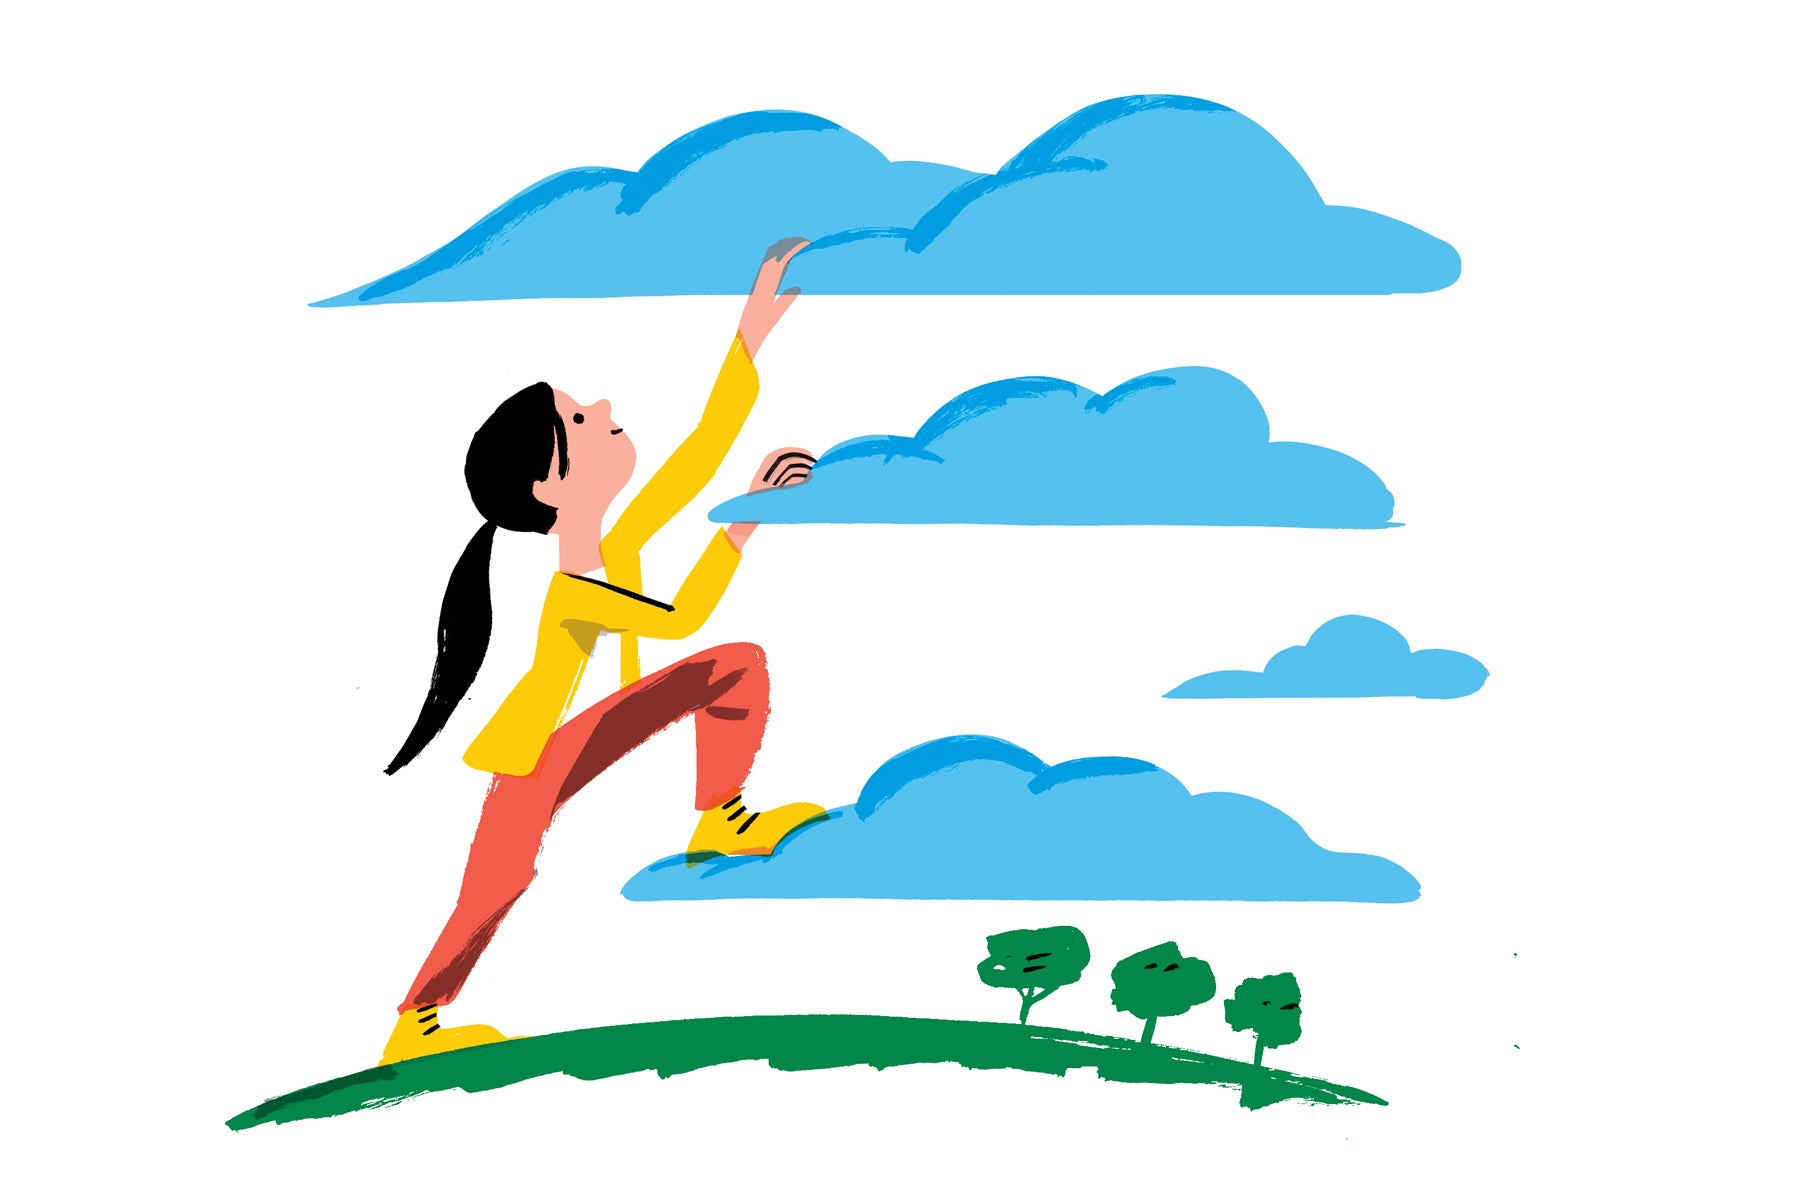 Illustration of a young girl with brown hair and a yellow shirt on with clouds above her. The clouds are staggered and she is climbing them like steps. This is a metaphor for realizing her dreams and future goals. 